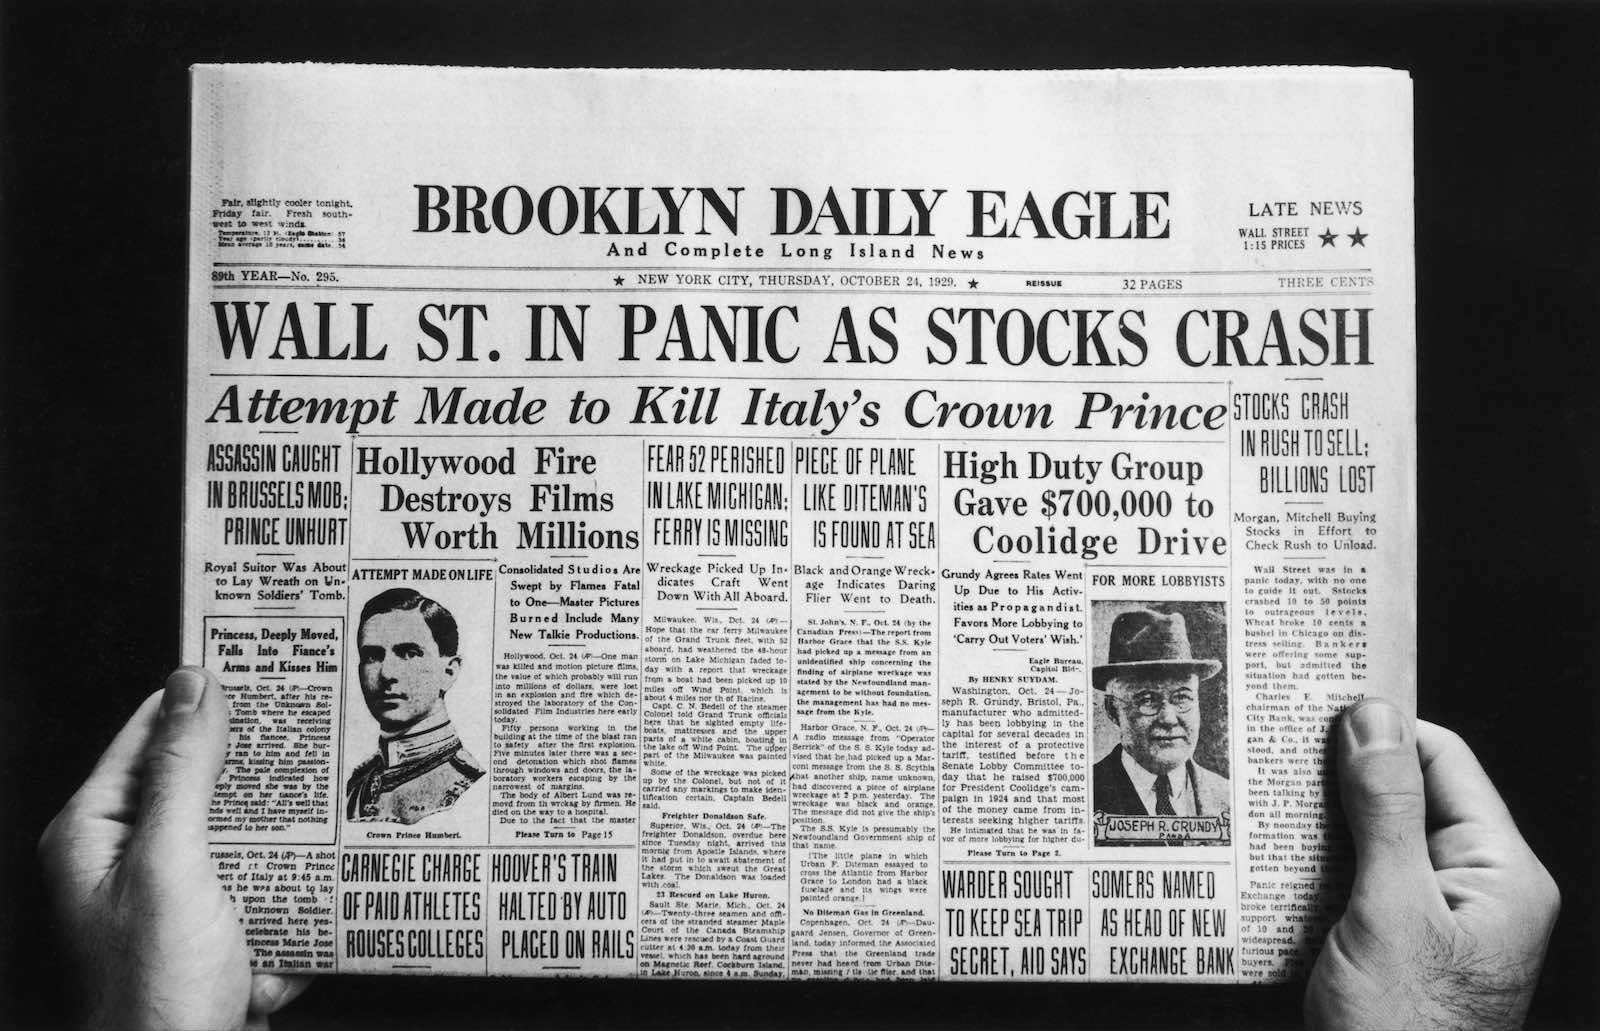 The front page of the Brooklyn Daily Eagle newspaper the day after what became known as Black Thursday, 24 October 1929, and the beginning of the Great Depression (Hulton Archive/Getty Images)